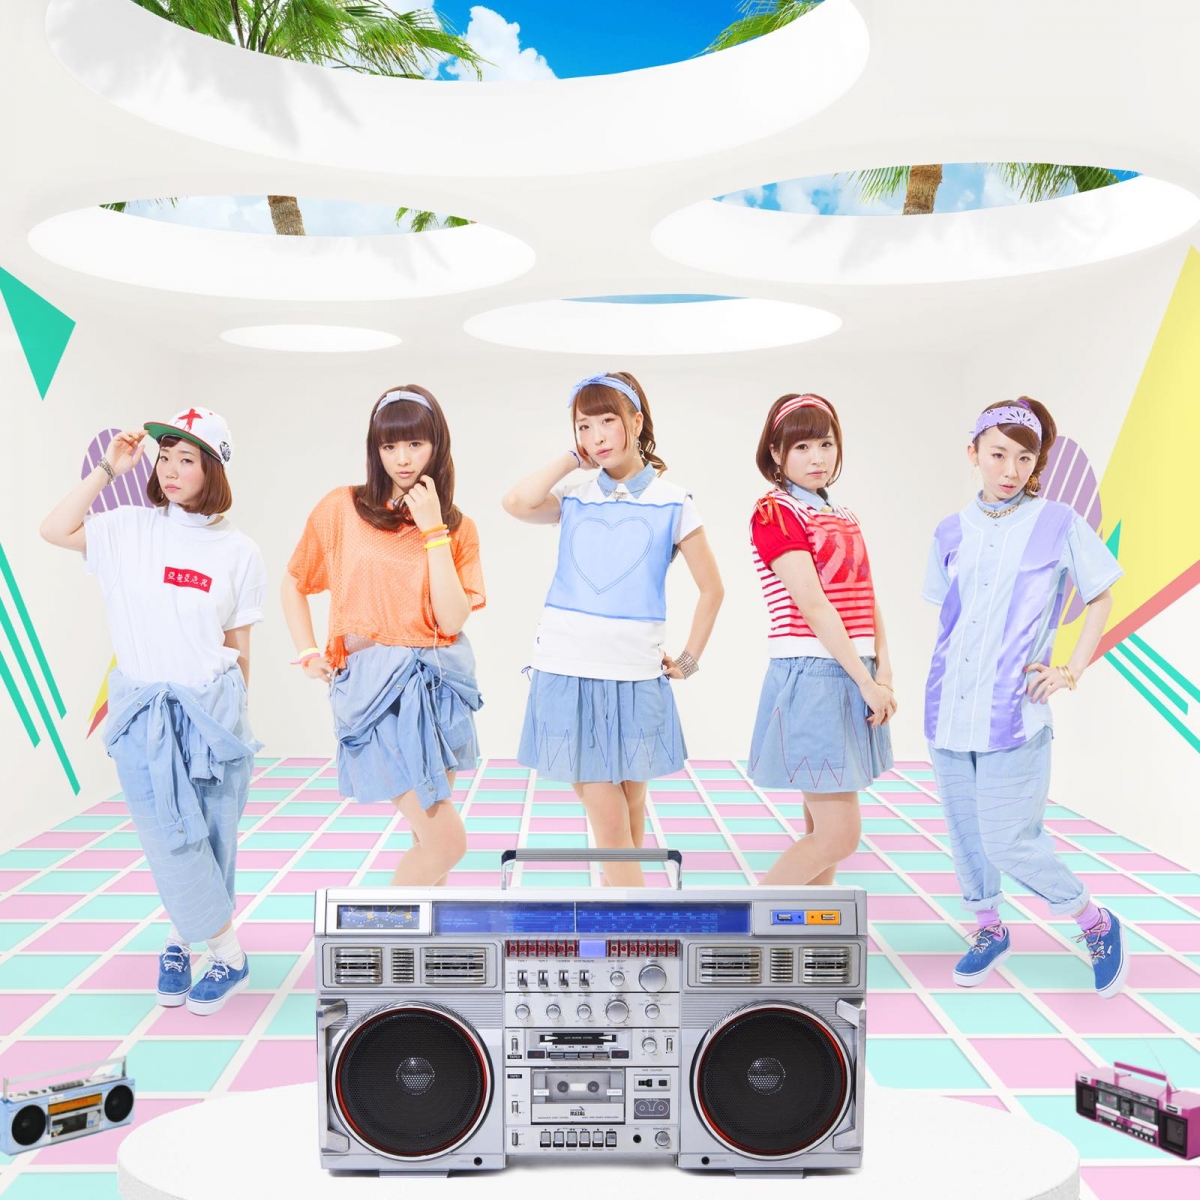 Especia Like Big Loud Radios and Fresh-Smelling Armpits in the MV for “Aviator/Boogie Aroma”!